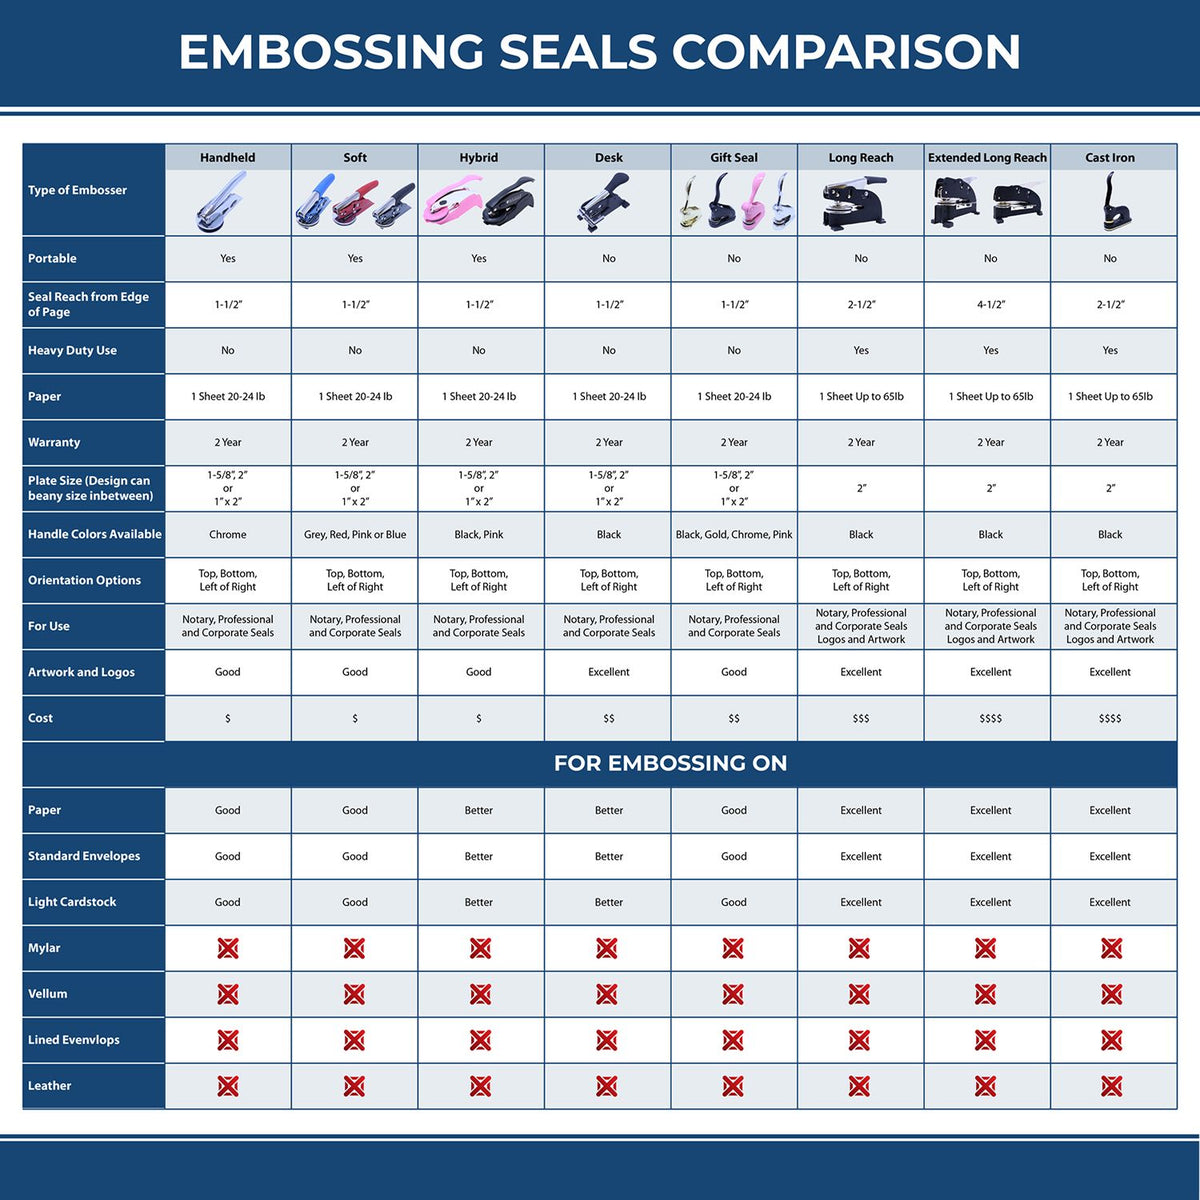 A comparison chart for the different types of mount models available for the Hybrid North Dakota Engineer Seal